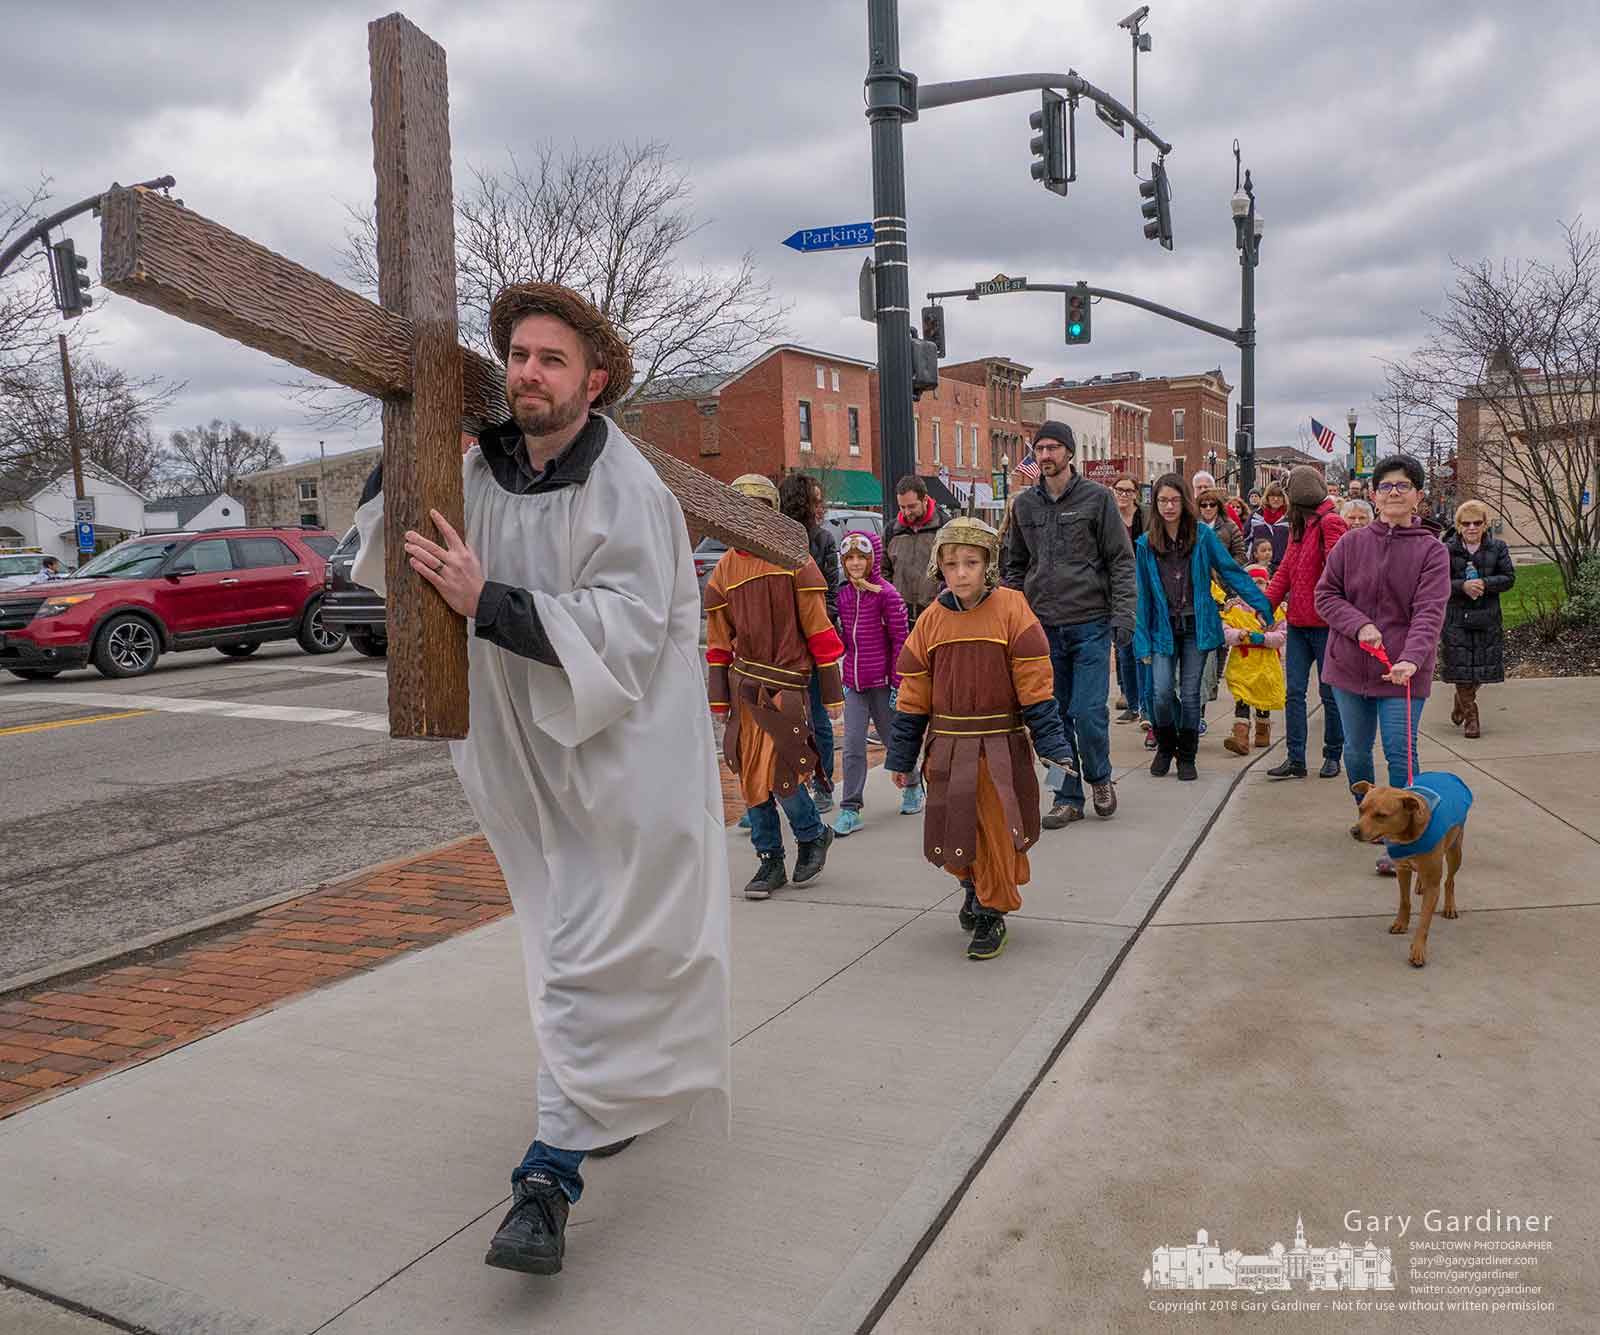 The Good Friday procession from Cornerstone Church to Church of the Messiah in Uptown Westerville nears its completion in time for the noon service. My Final Photo for March 30, 2018.